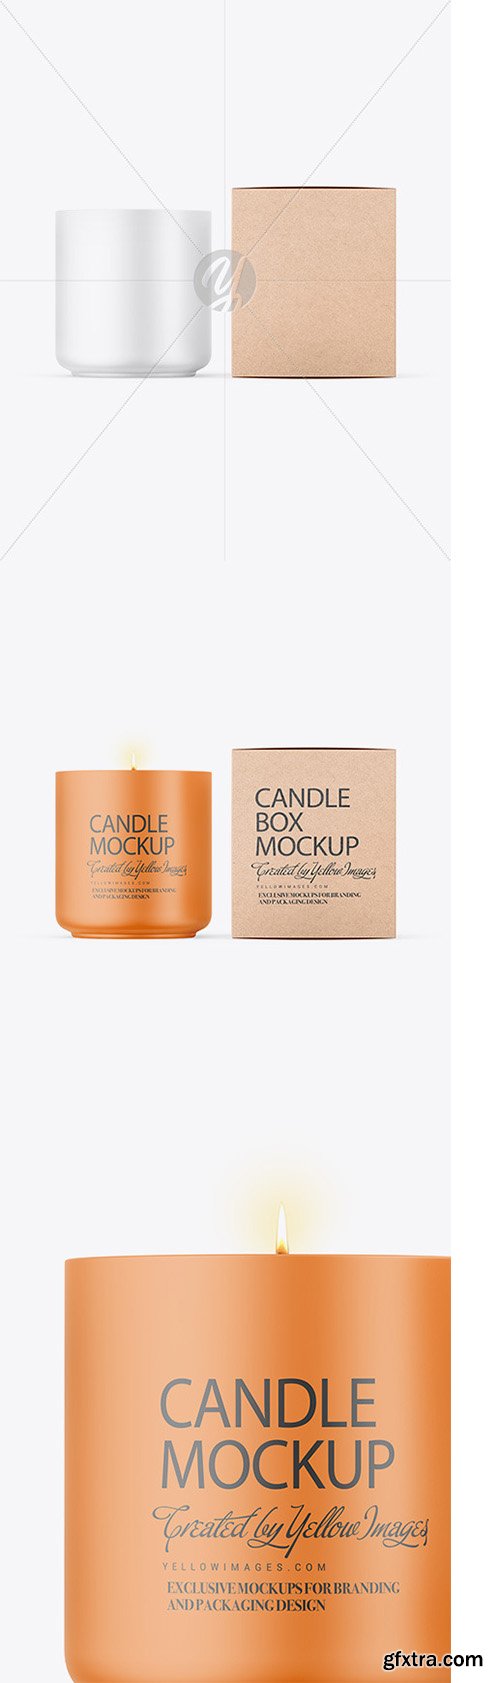 Download Psd Mockups Candle In Gift Box Mockup Download Branding Mockups Yellowimages Mockups